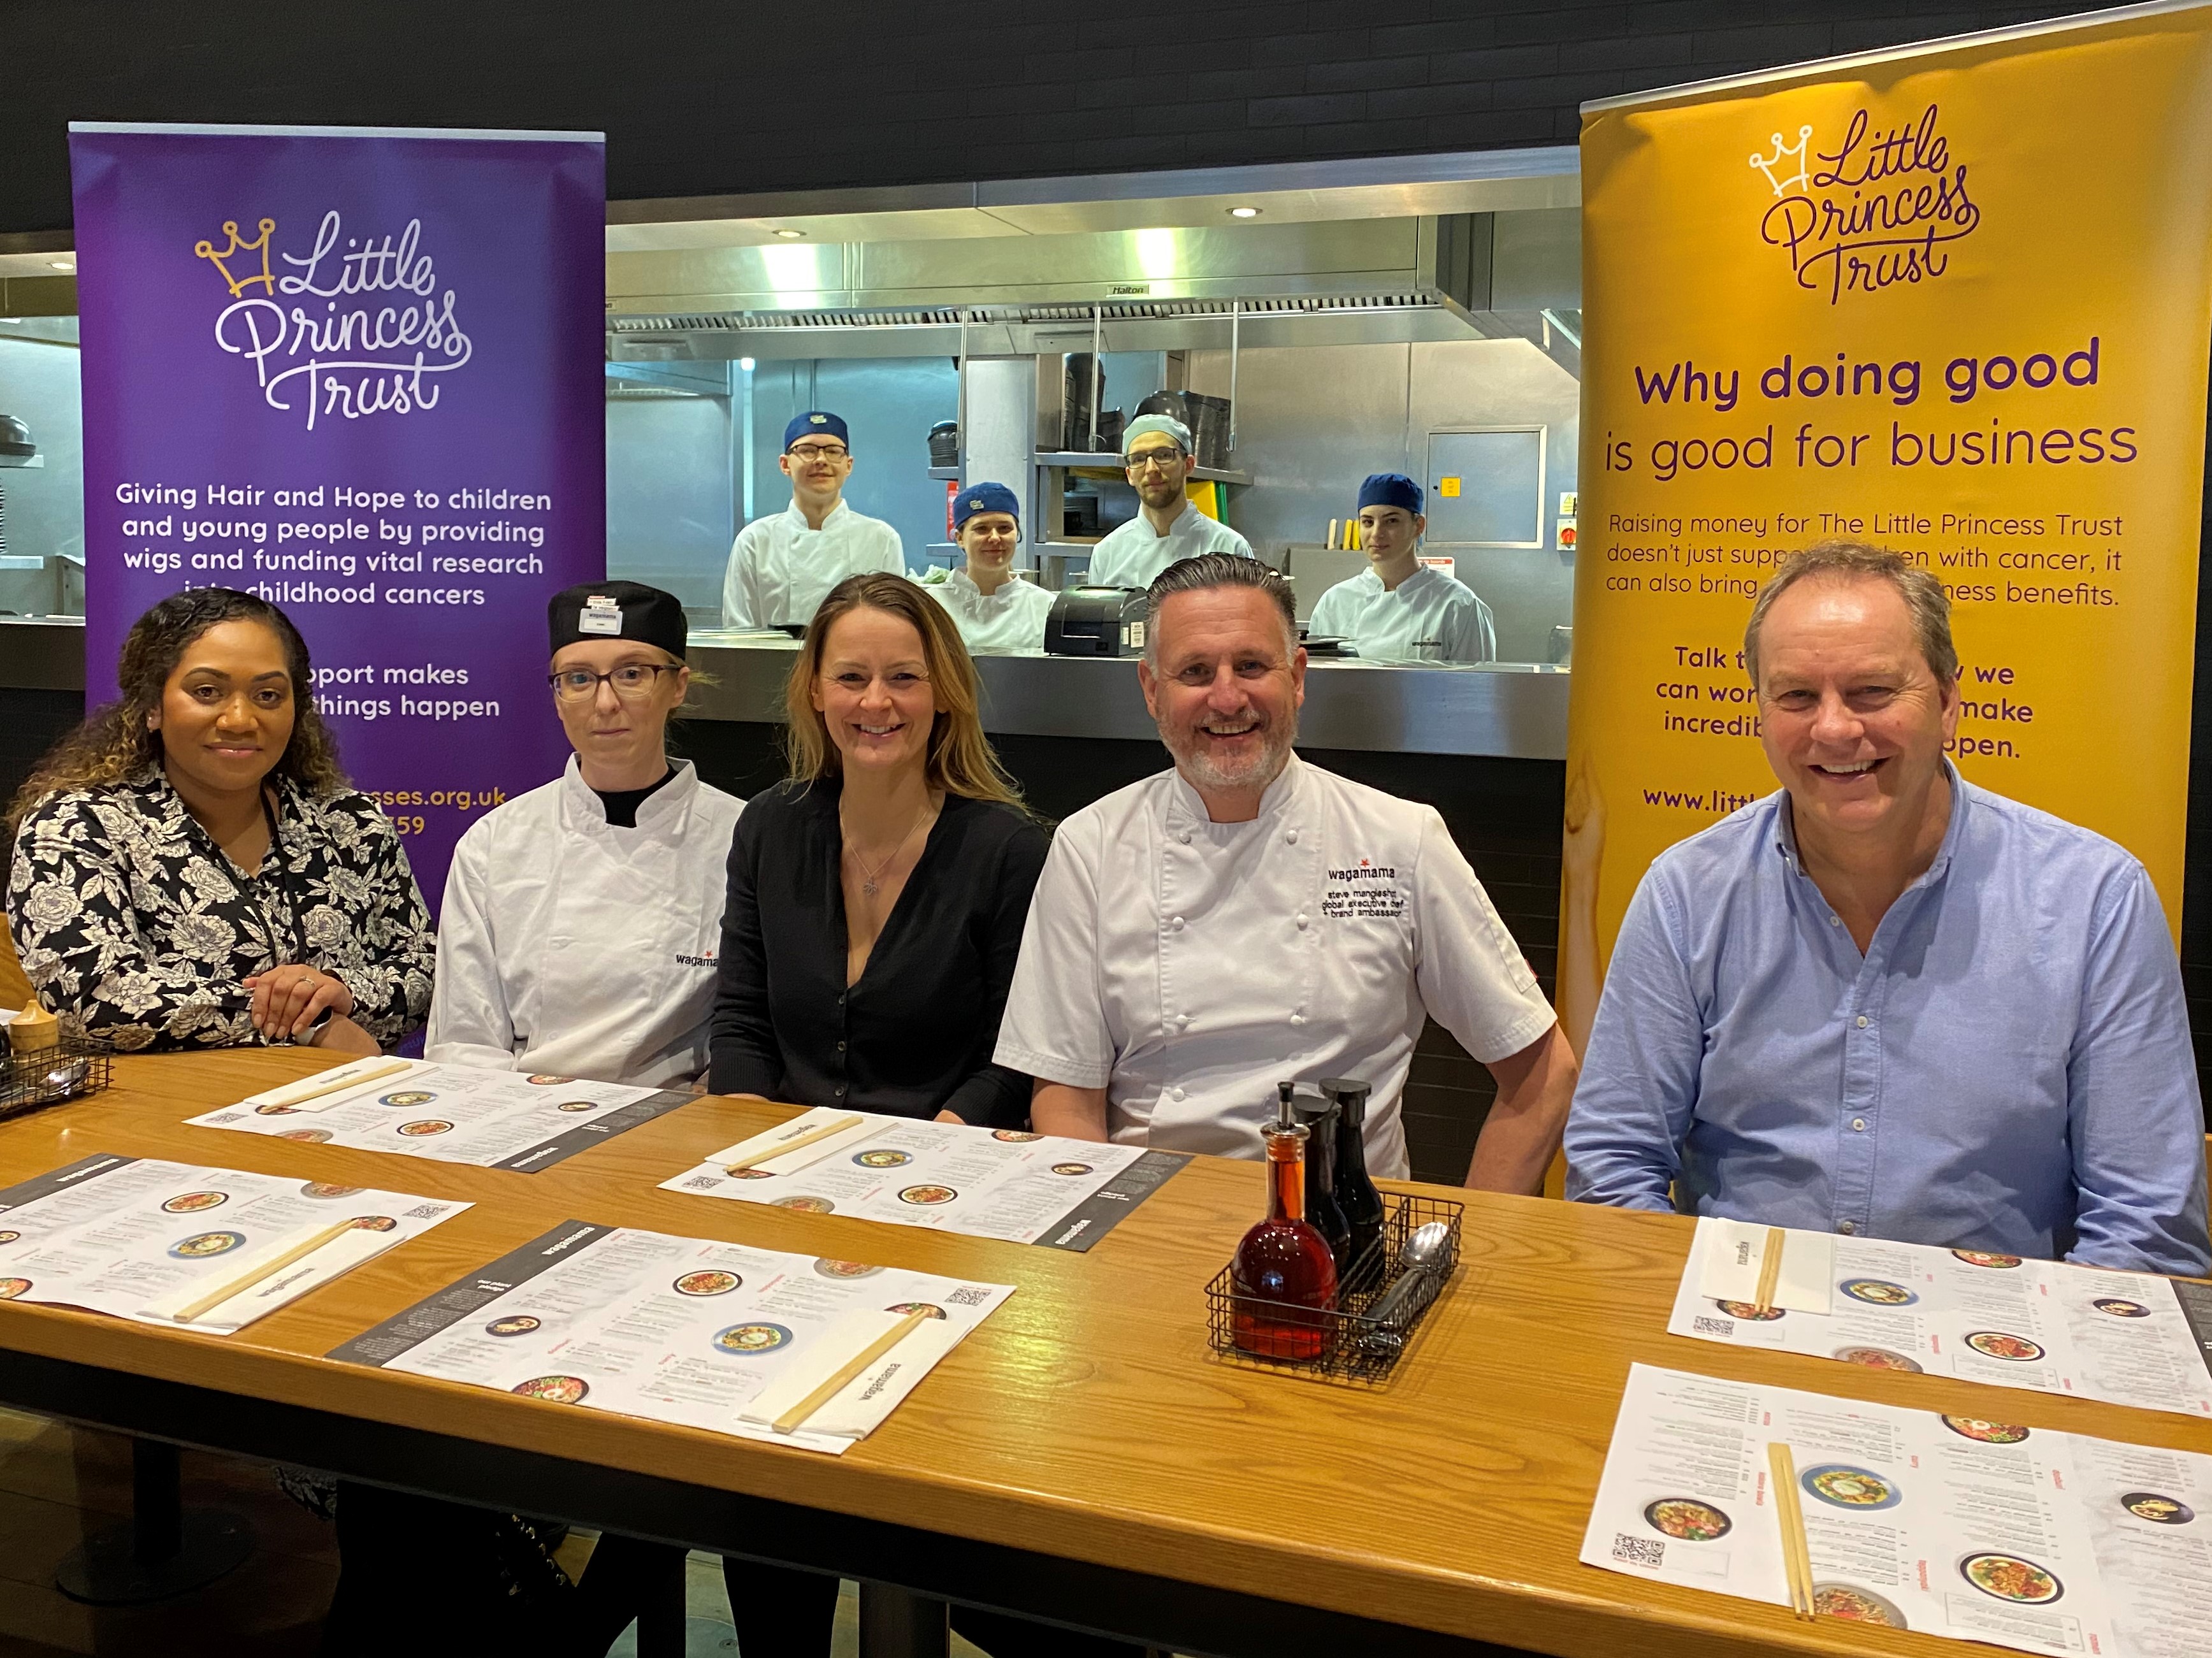 Seated at Wagamama in Hereford are Phil Brace (right) and Wendy Tarplee-Morris (centre), from The Little Princess Trust, with Emi-Luisane Richards-Buadromo (left), Steve Mangleshot and Head Chef Keri Blackwell. And in the kitchen are (l-r) Jakub Madejski, Hannah Sheehan, Mateusz Baliga and Vanessza Jobbagy.